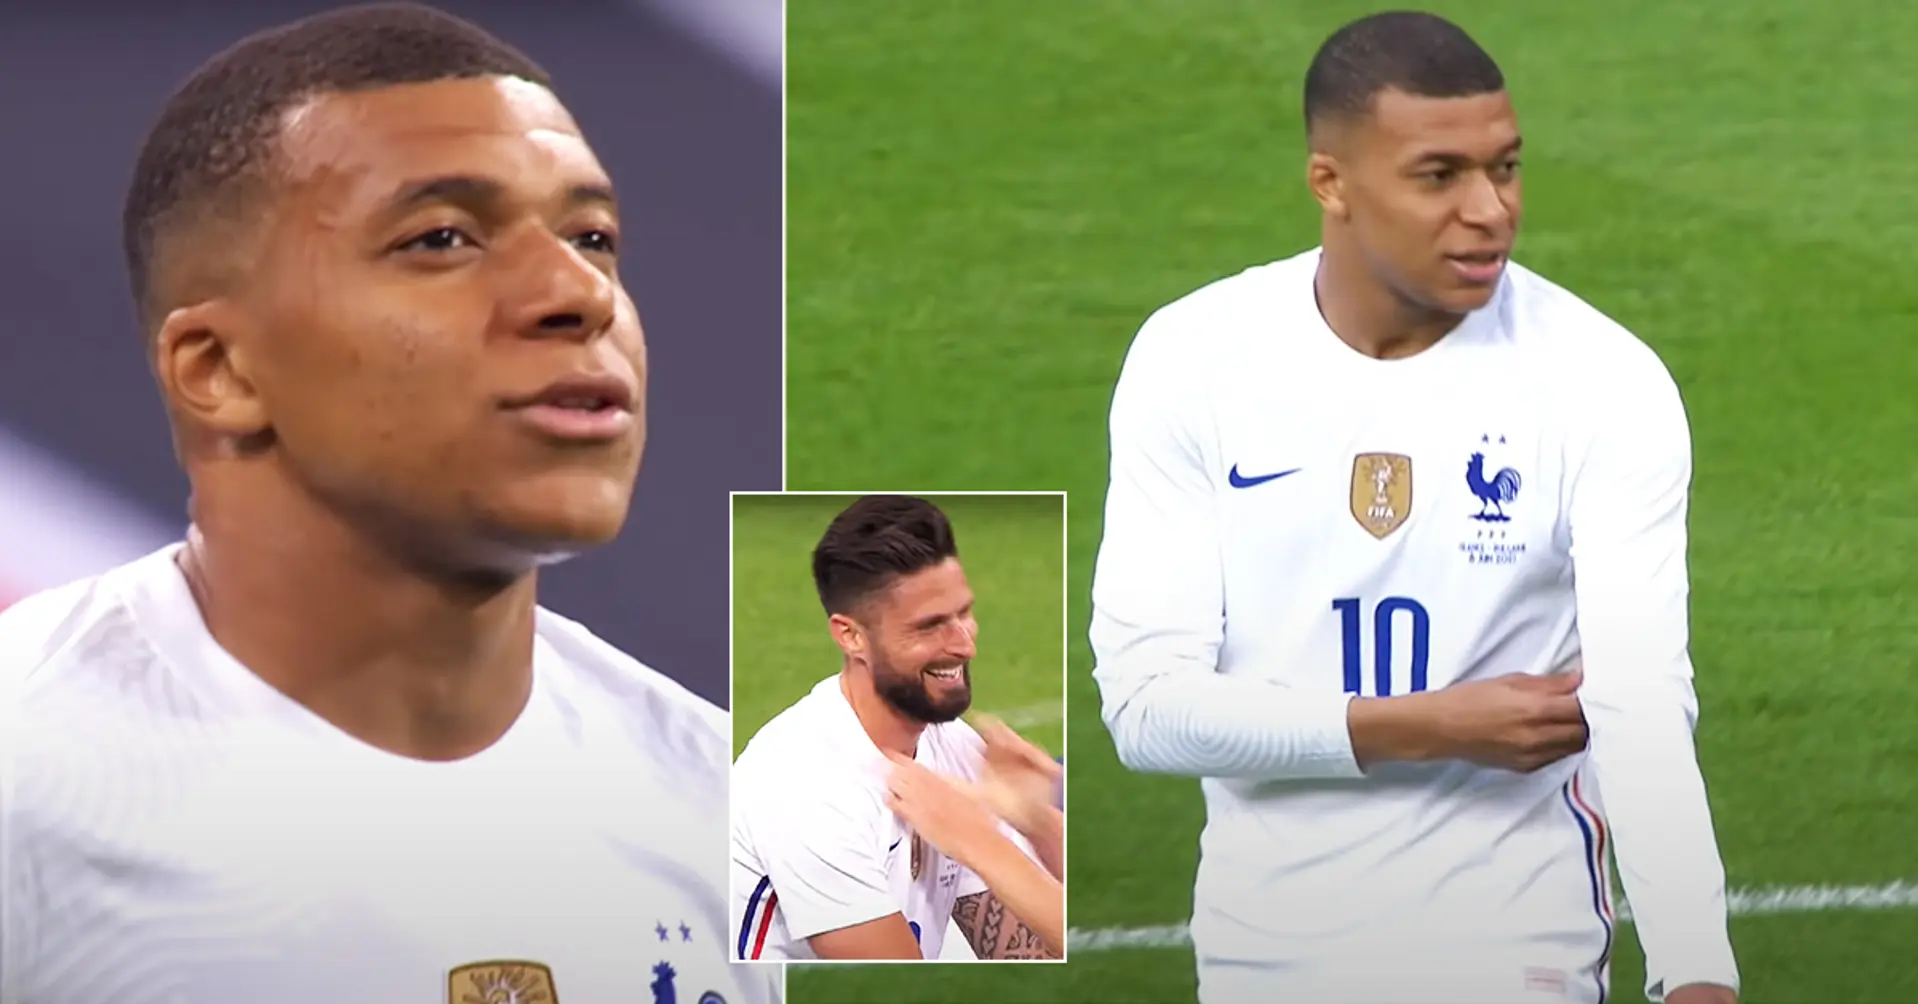 Scandal in France: Kylian Mbappe ‘feels attacked’ by Giroud’s comments, wanted to make a statement